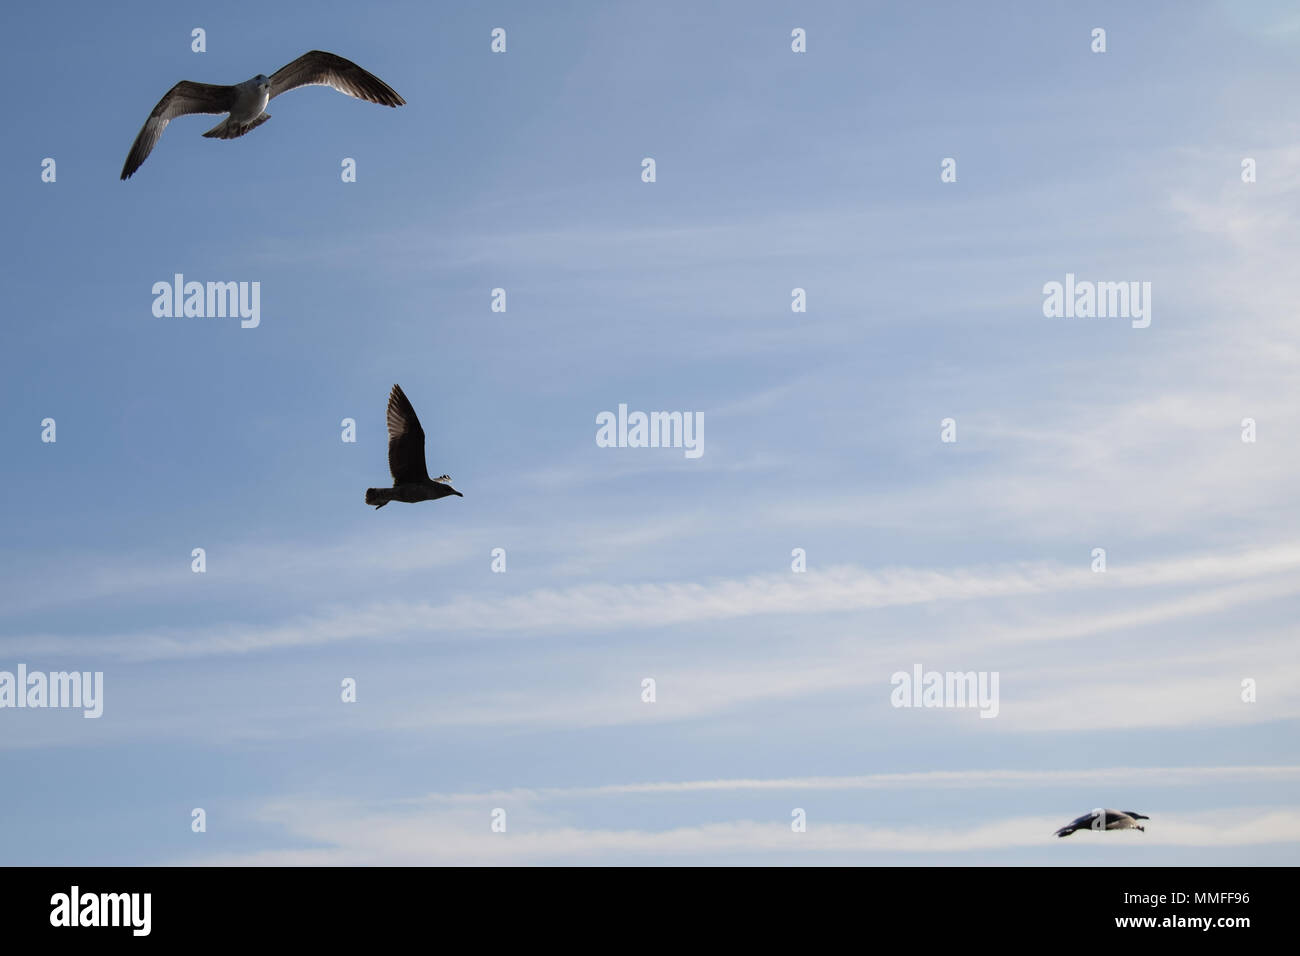 Three Seagulls flying over the sea Stock Photo